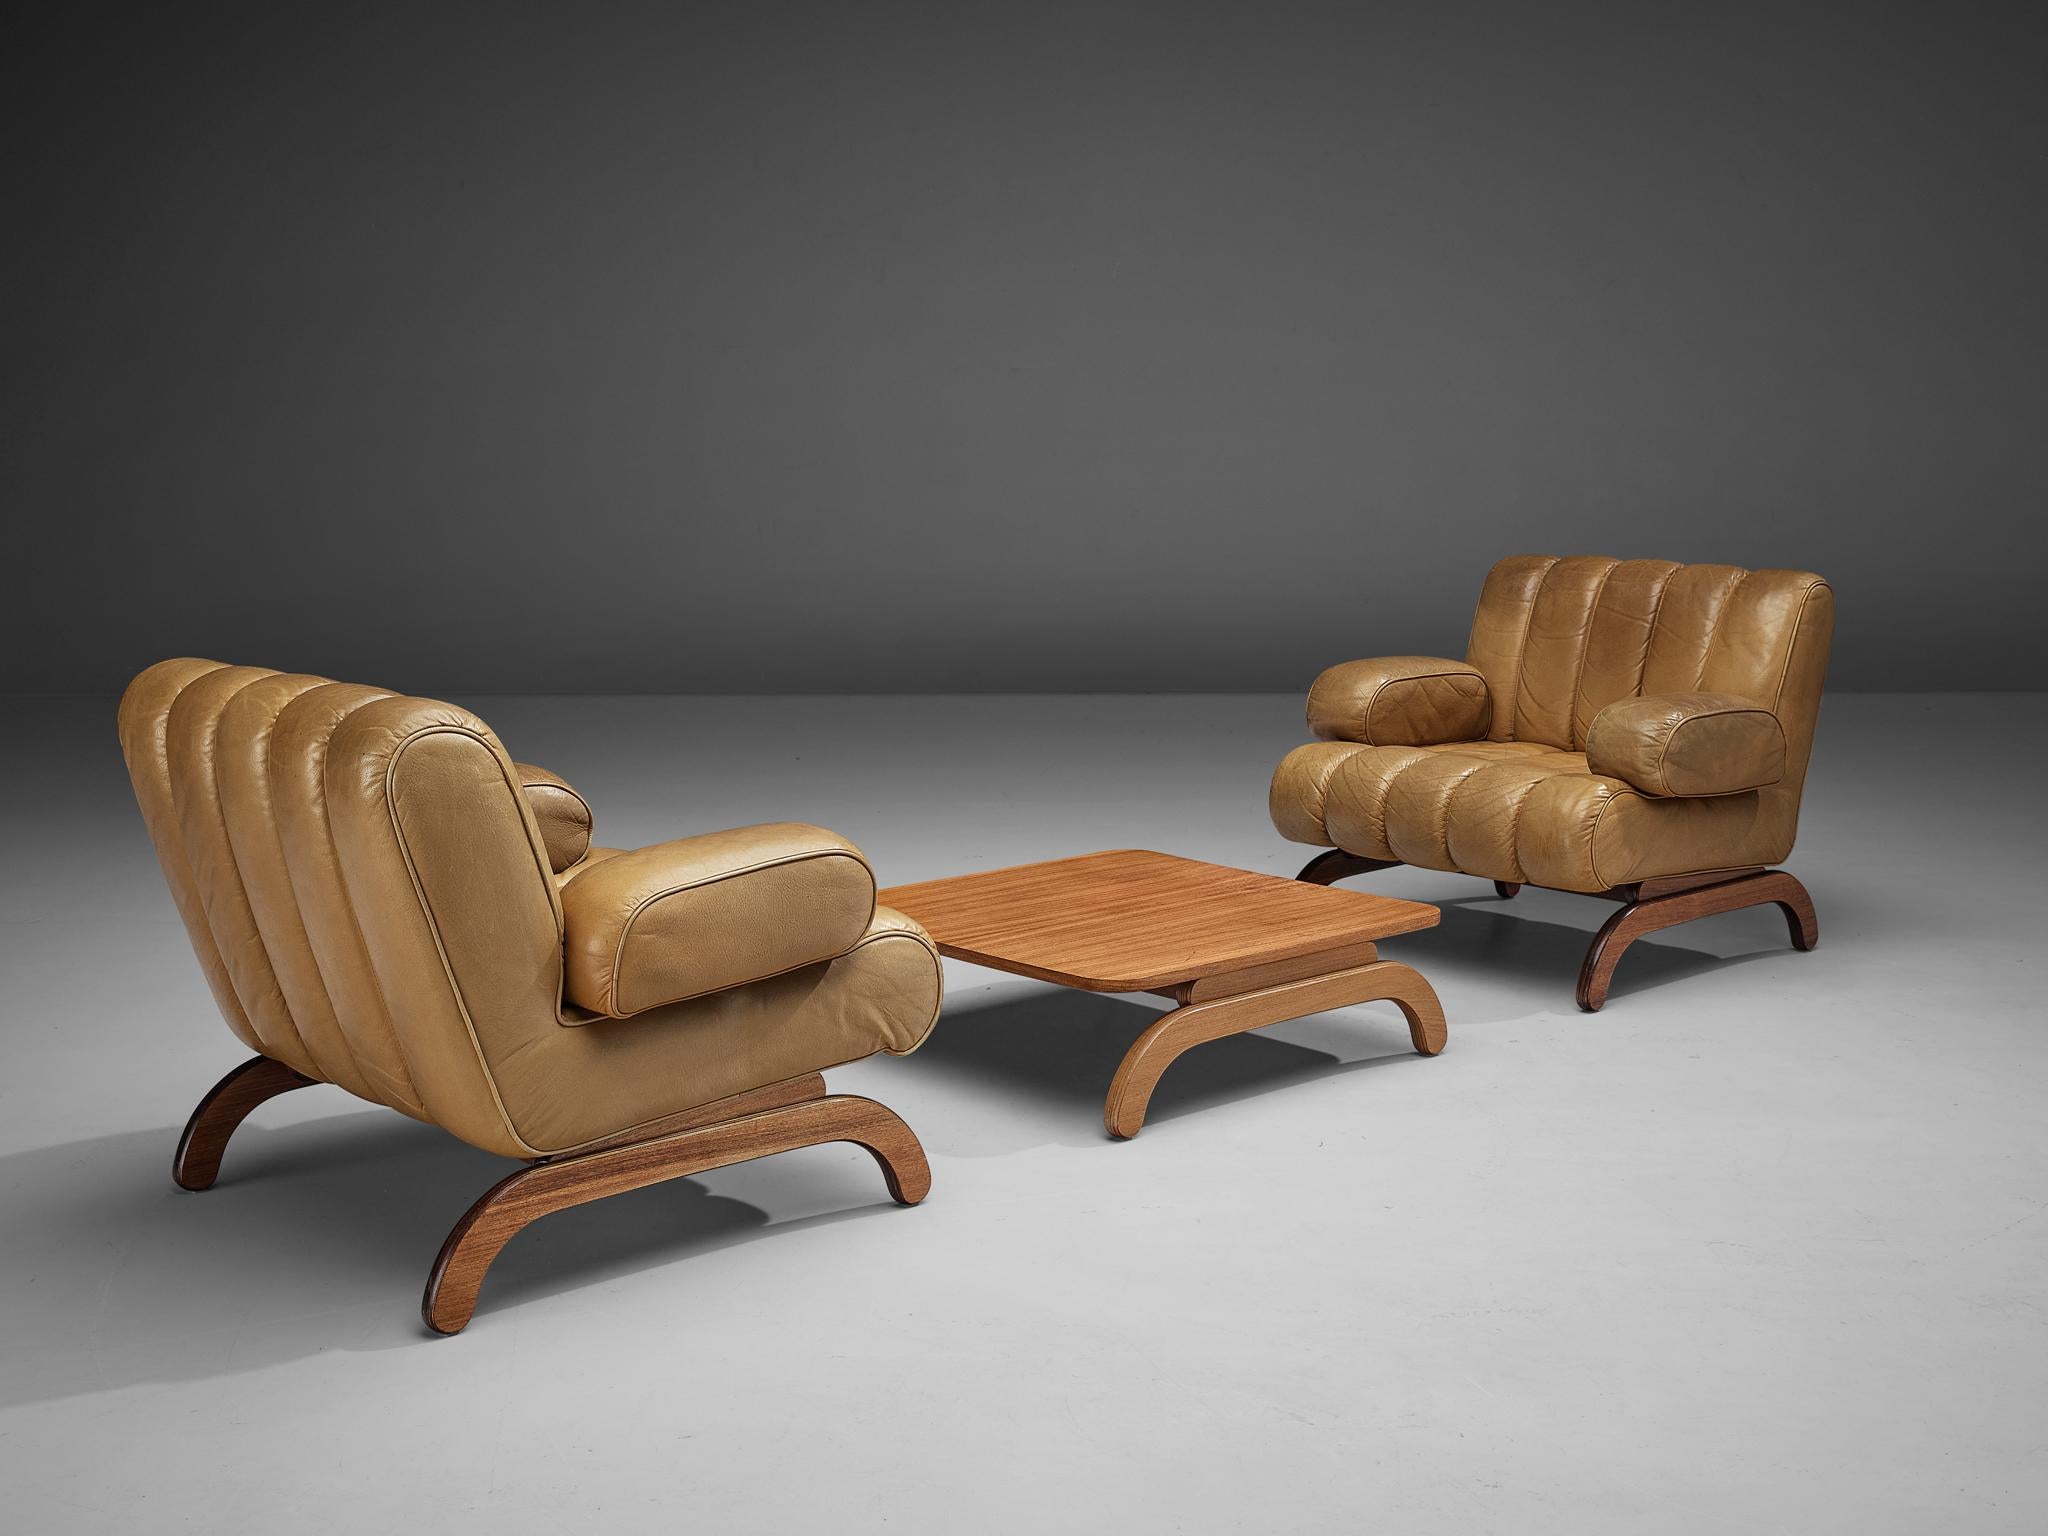 Karl Wittman for Wittmann Möbelwerkstätten, two lounge chairs, coffee table, leather, teak, Austria, designed in 1968 

This rare set of lounge chairs and coffee table is designed by the creative and talented designer Karl Wittman. The whole unit is